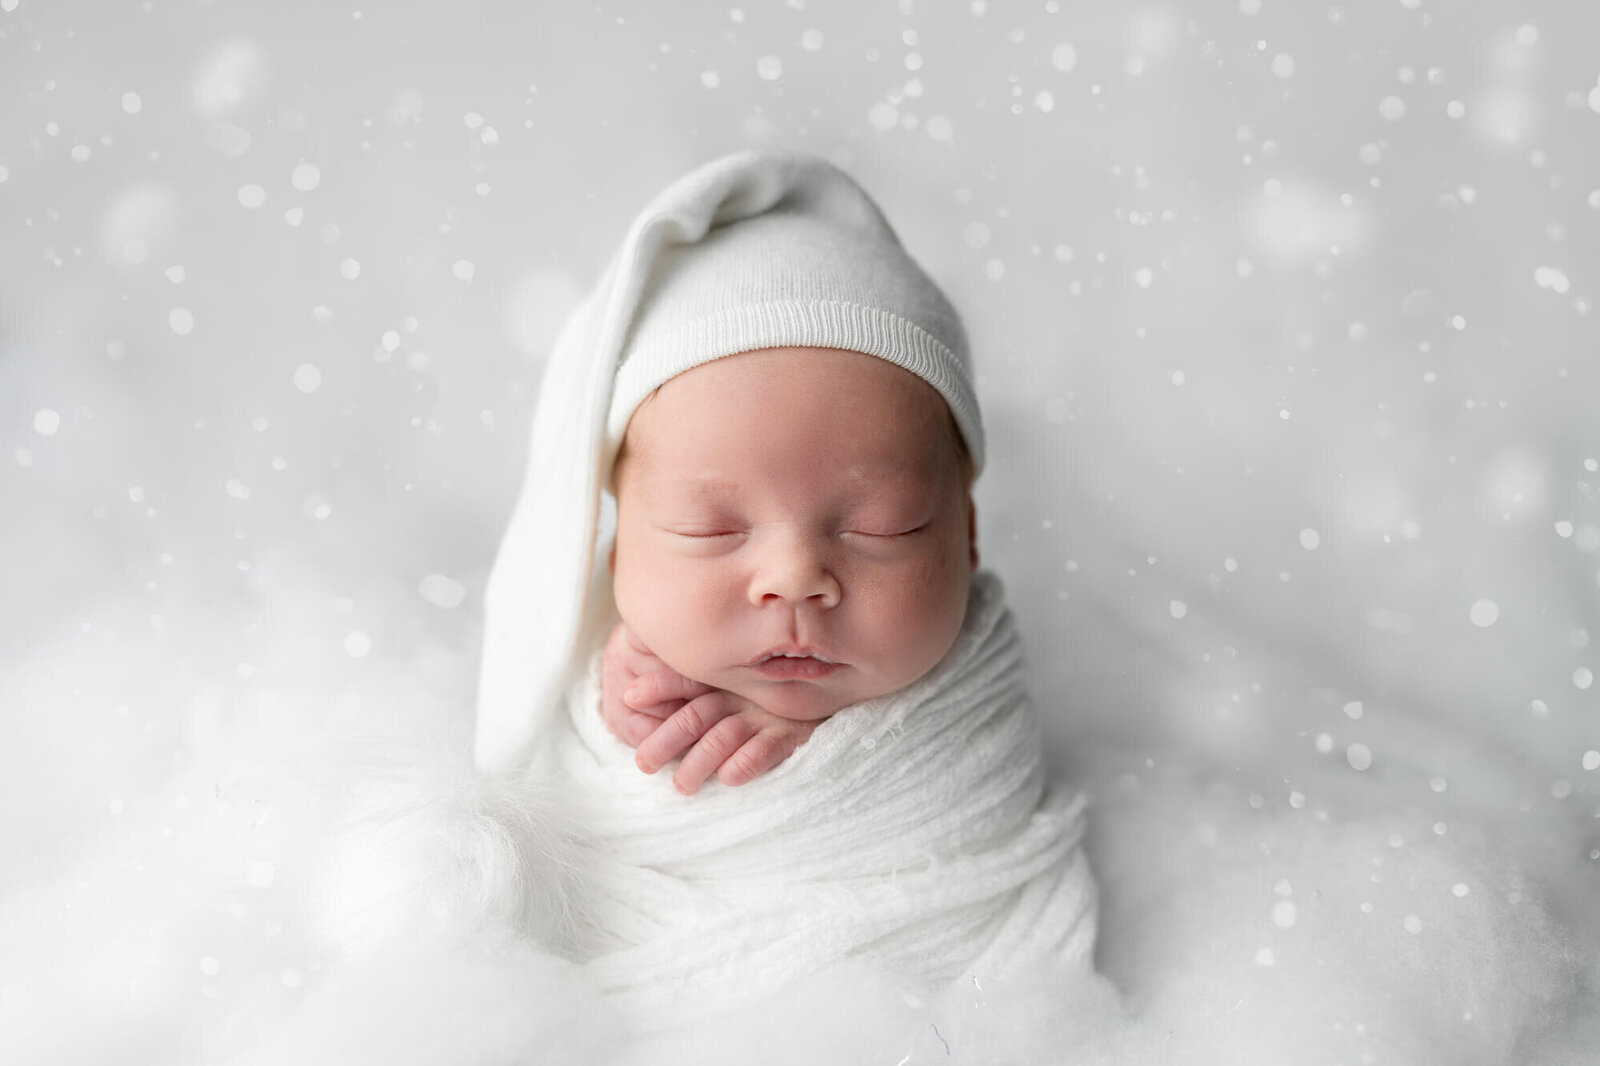 picture of baby as a snowman